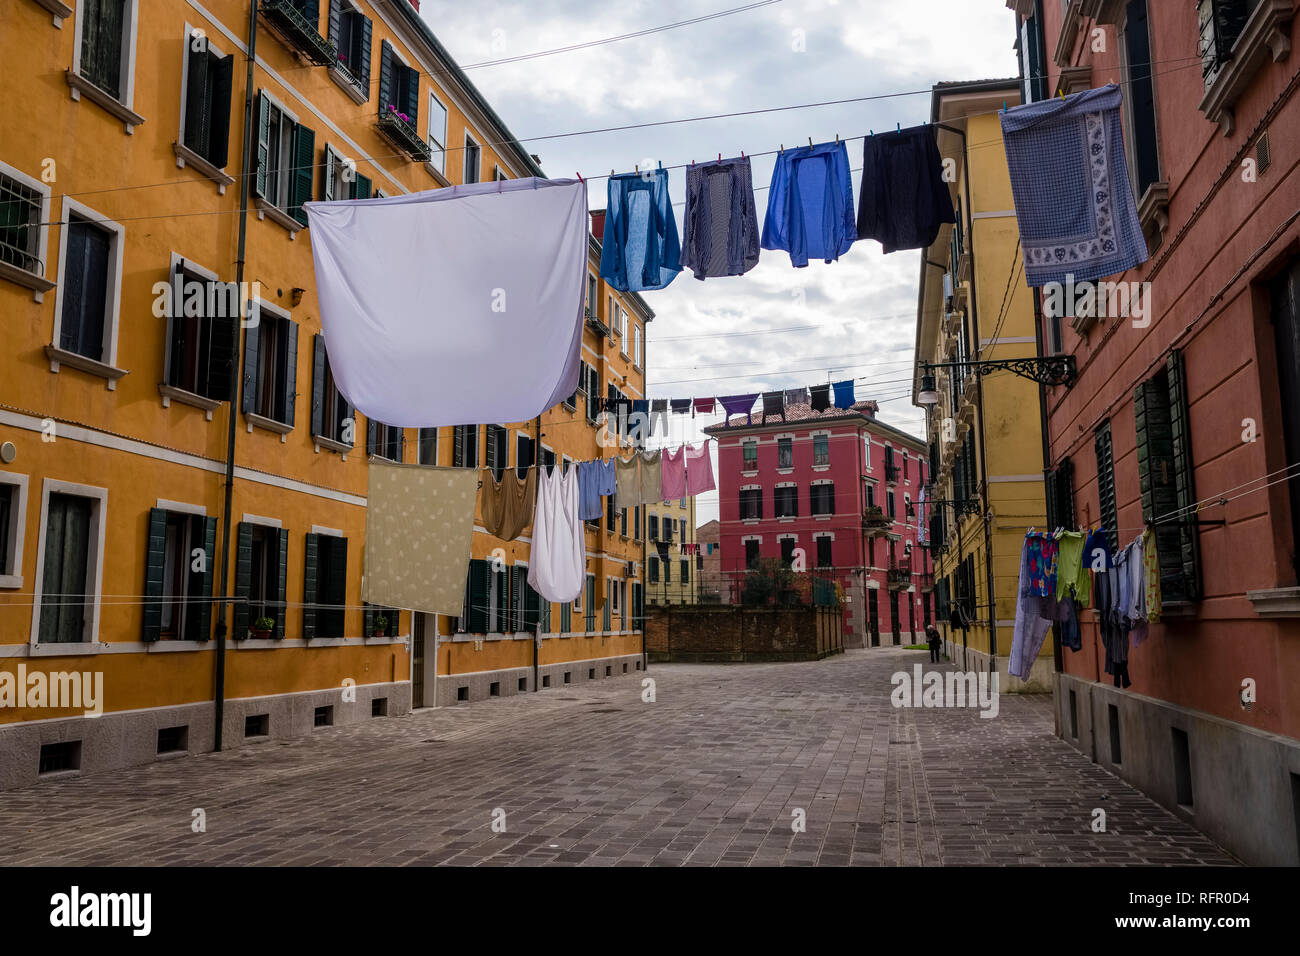 Narrow streets leading through the ailing brick houses of the so-called 'Floating city', laundry is put up on washing lines Stock Photo